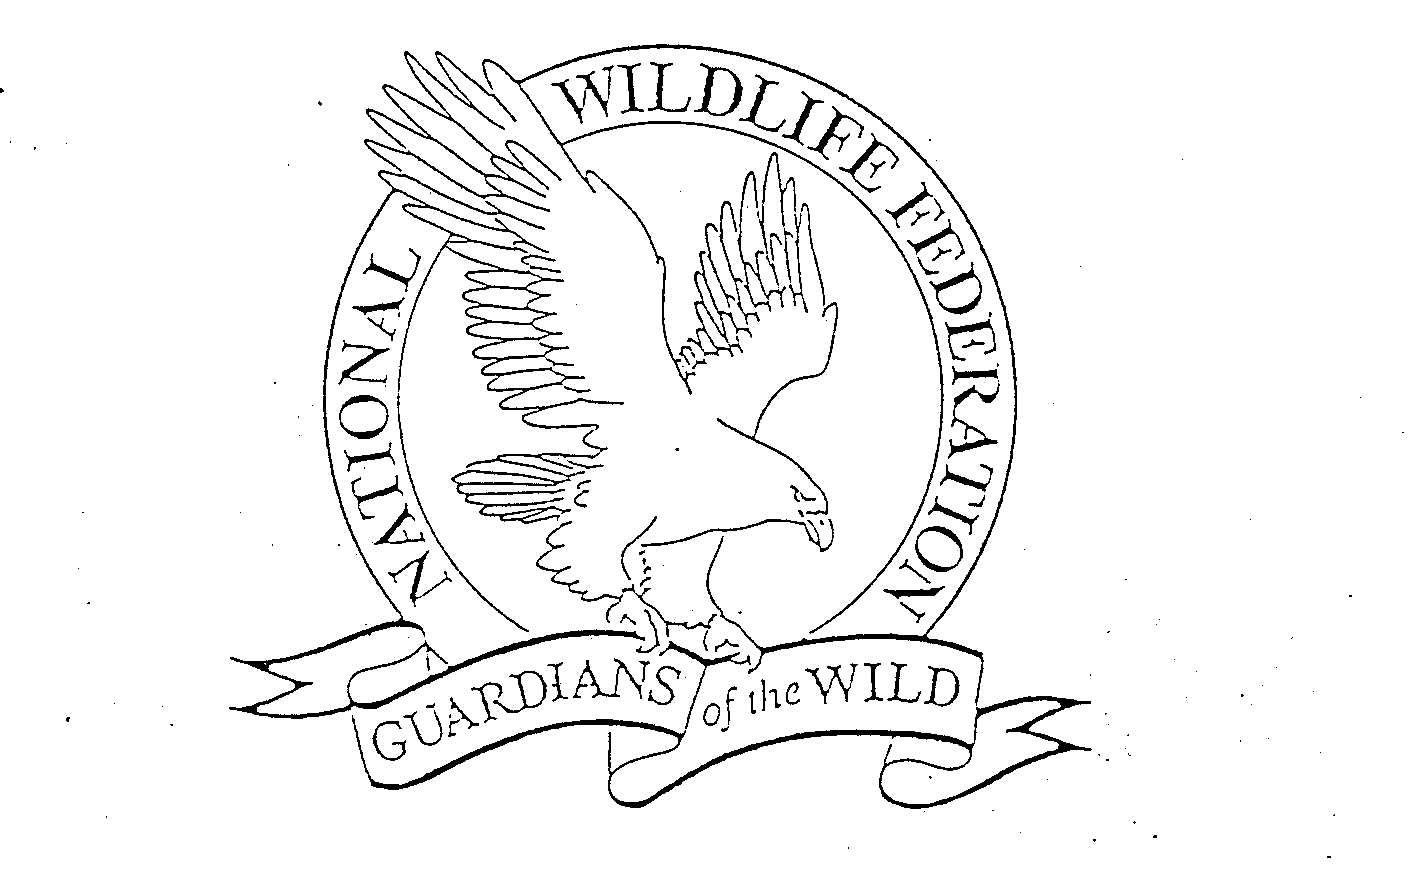  NATIONAL WILDLIFE FEDERATION GUARDIANS OF THE WILD